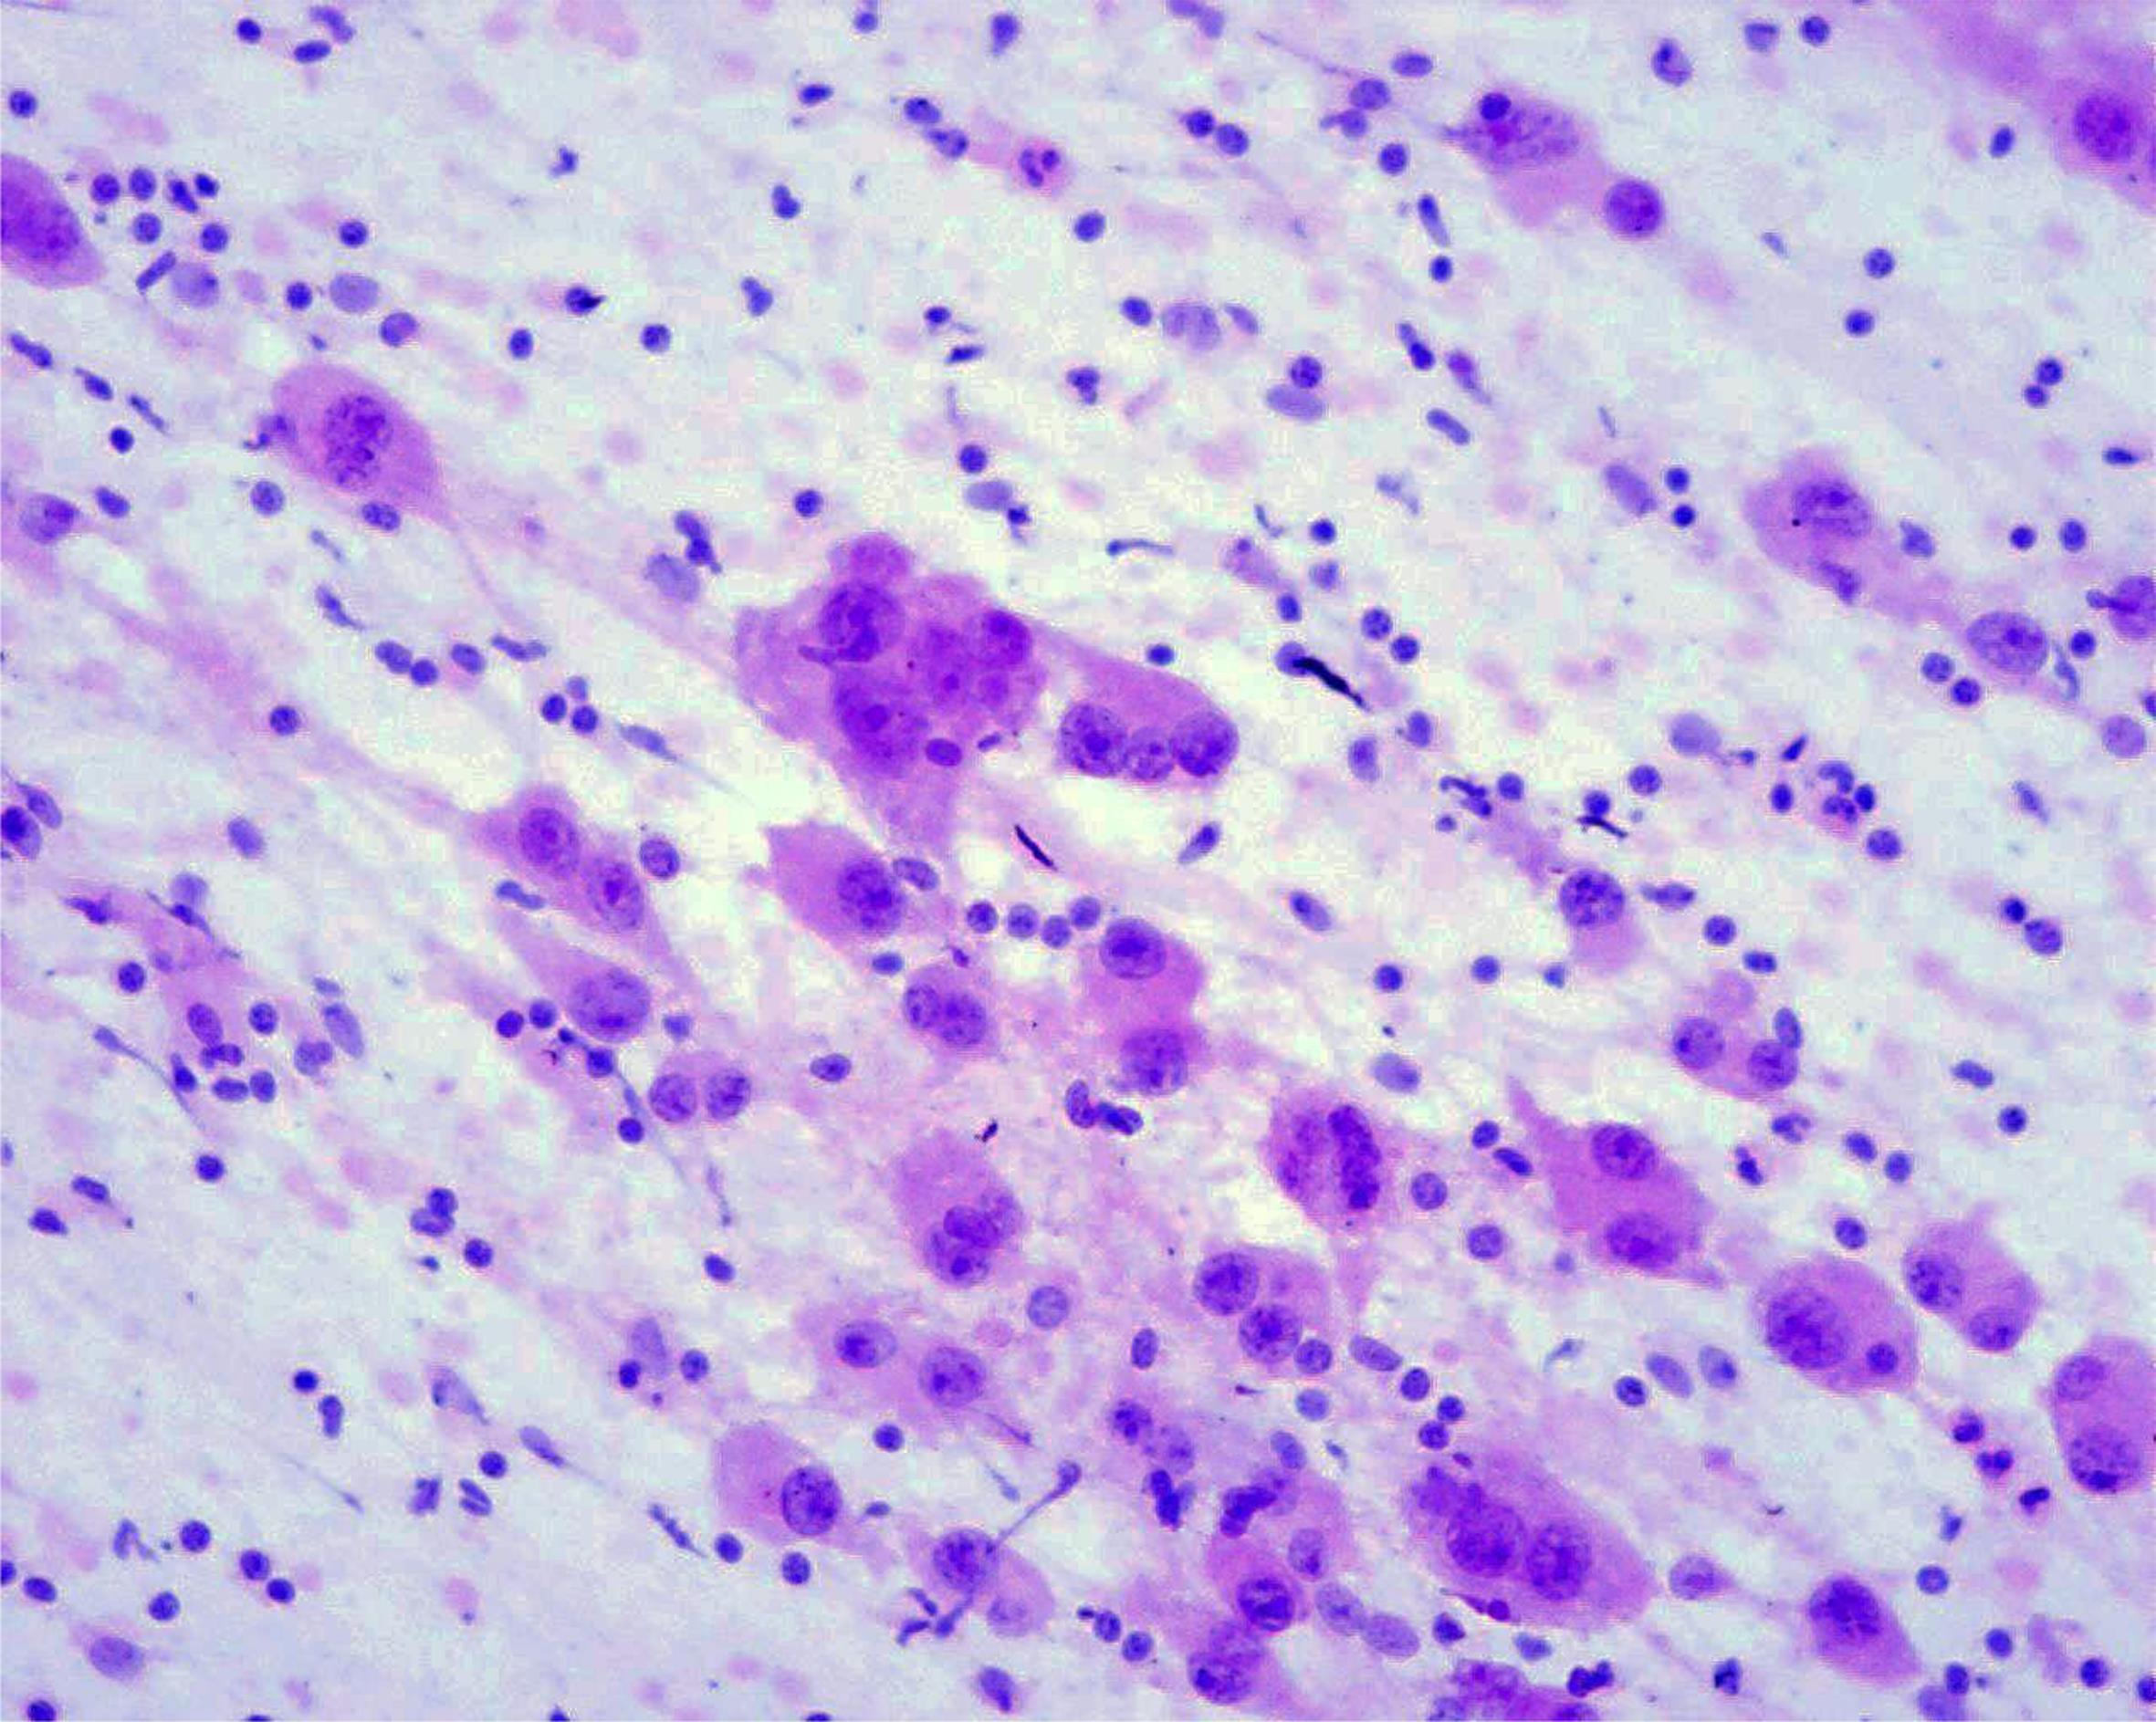 Multinucleated ganglion cells from the website of European Federation of Cytology.